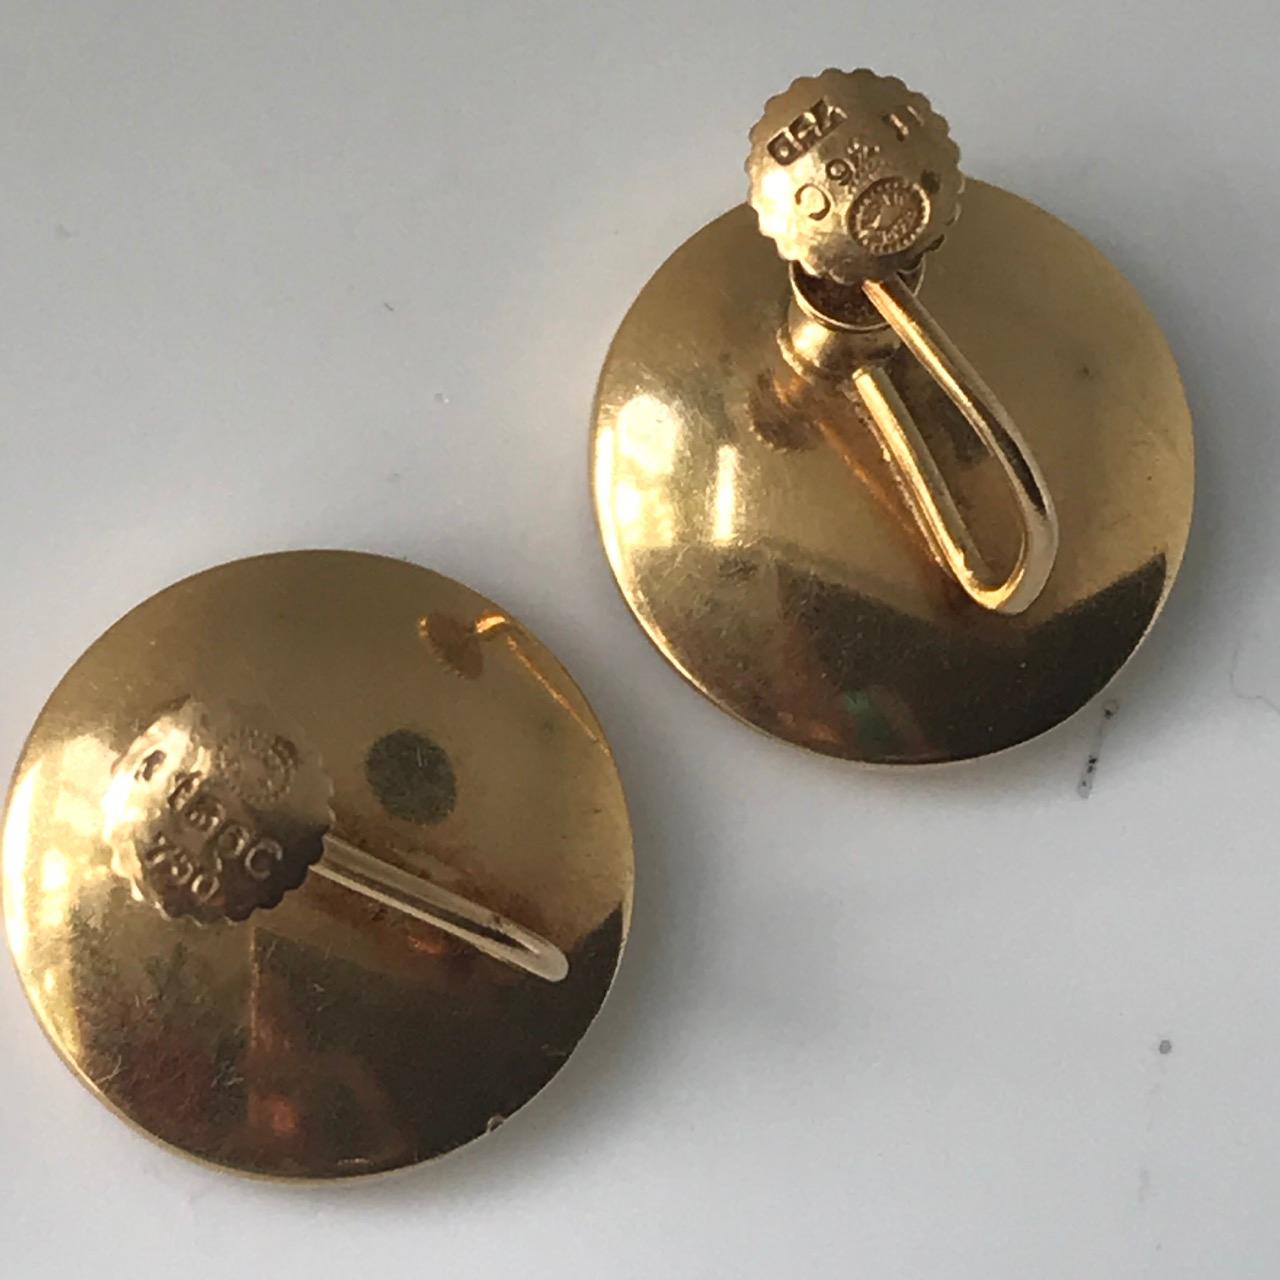 Georg Jensen Earring No. 1136C 18 Karat Gold by Nanna Ditzel In Good Condition For Sale In San Francisco, CA